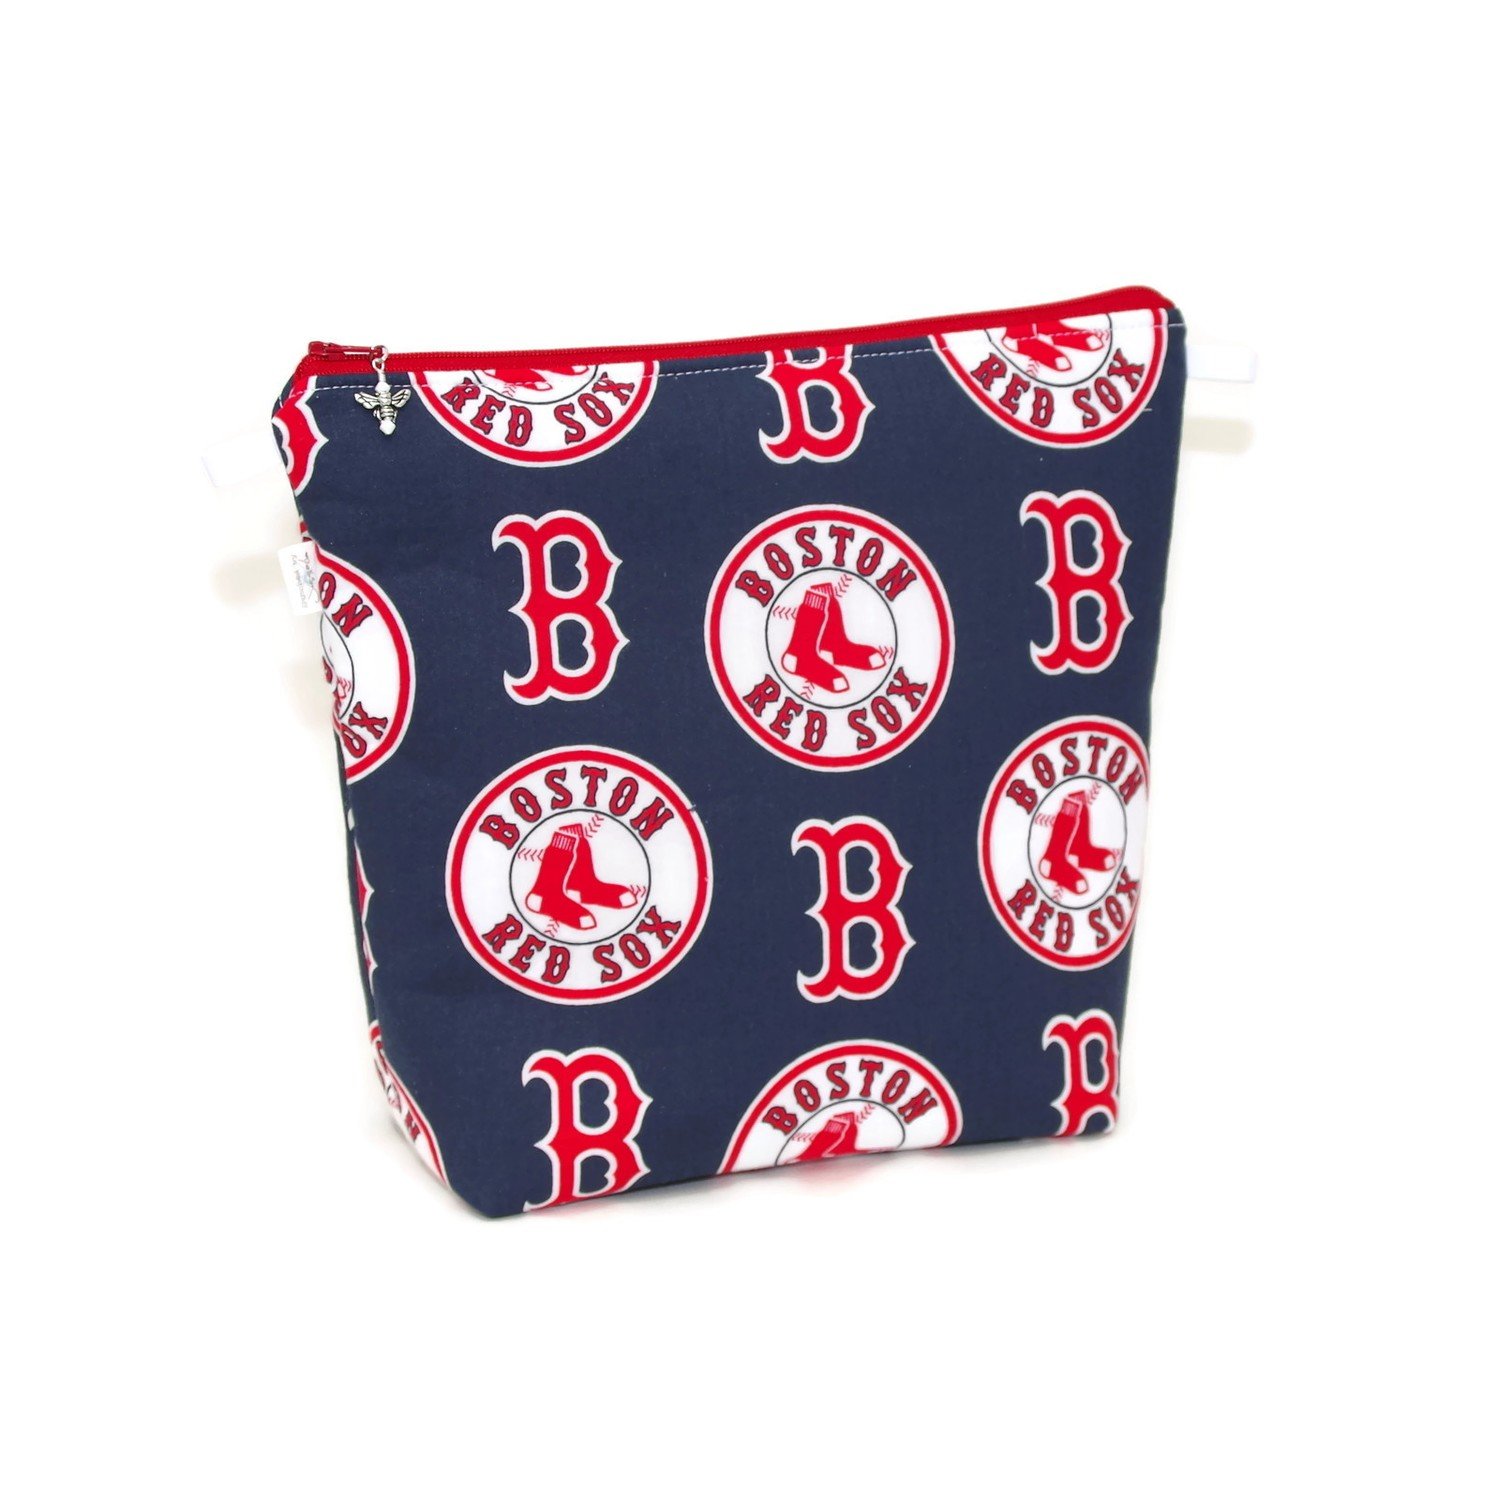 Red Sox - Tall Wedge